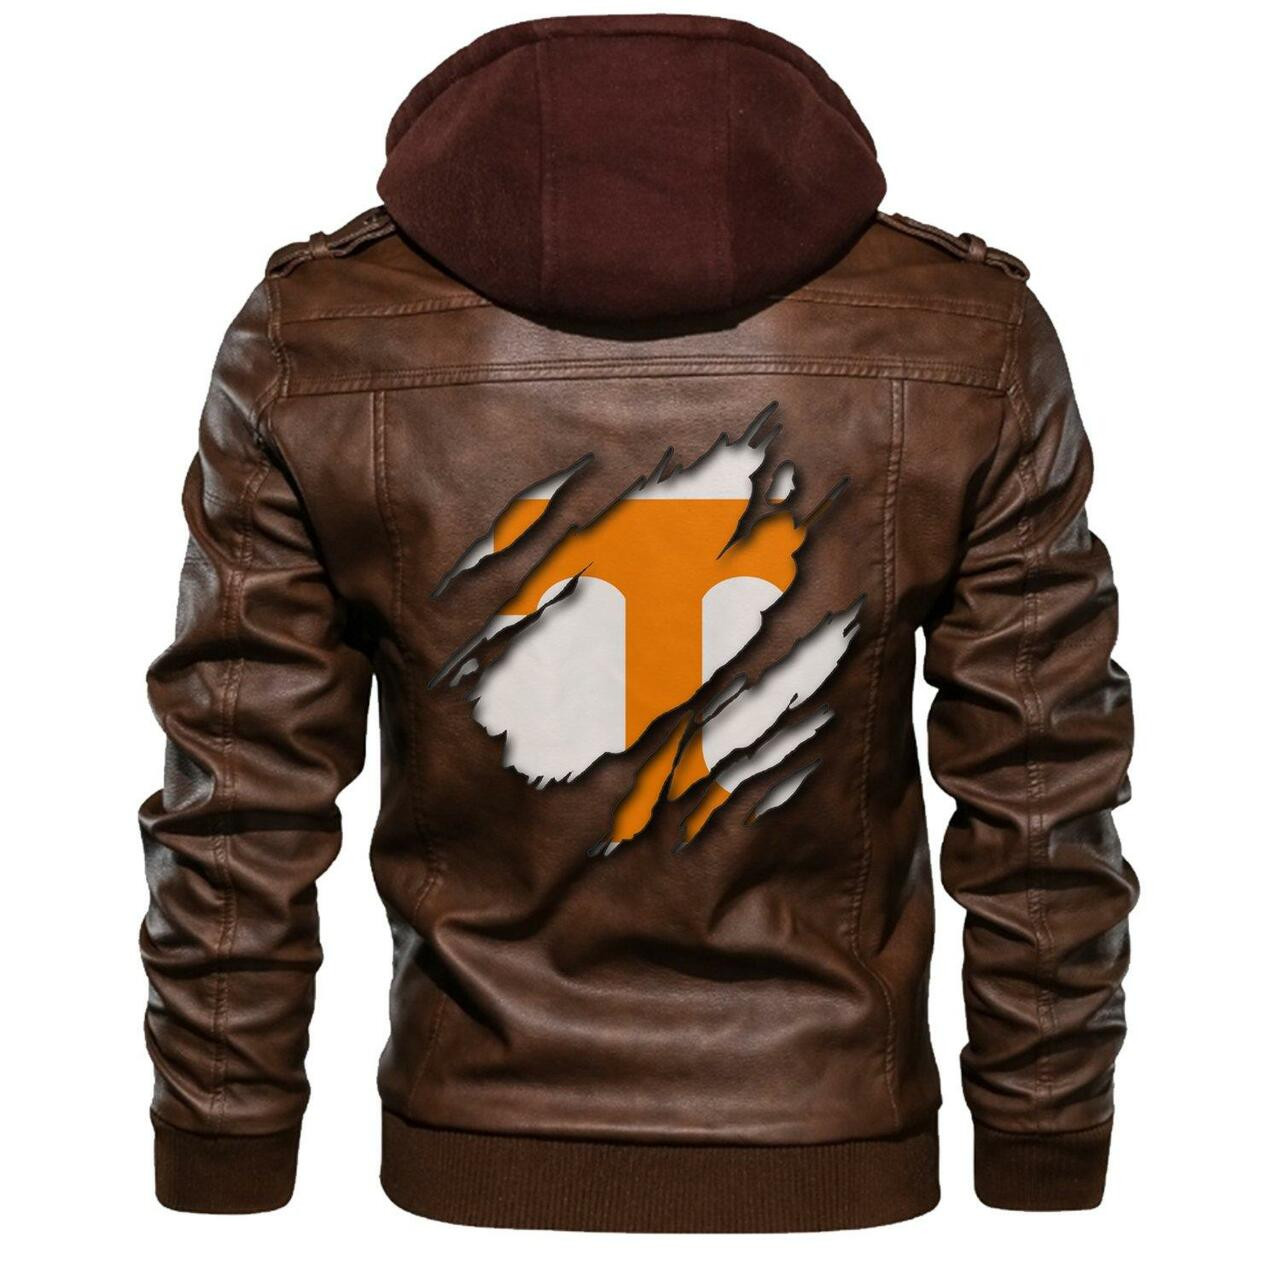 Top 200+ leather jacket so cool for your man 249